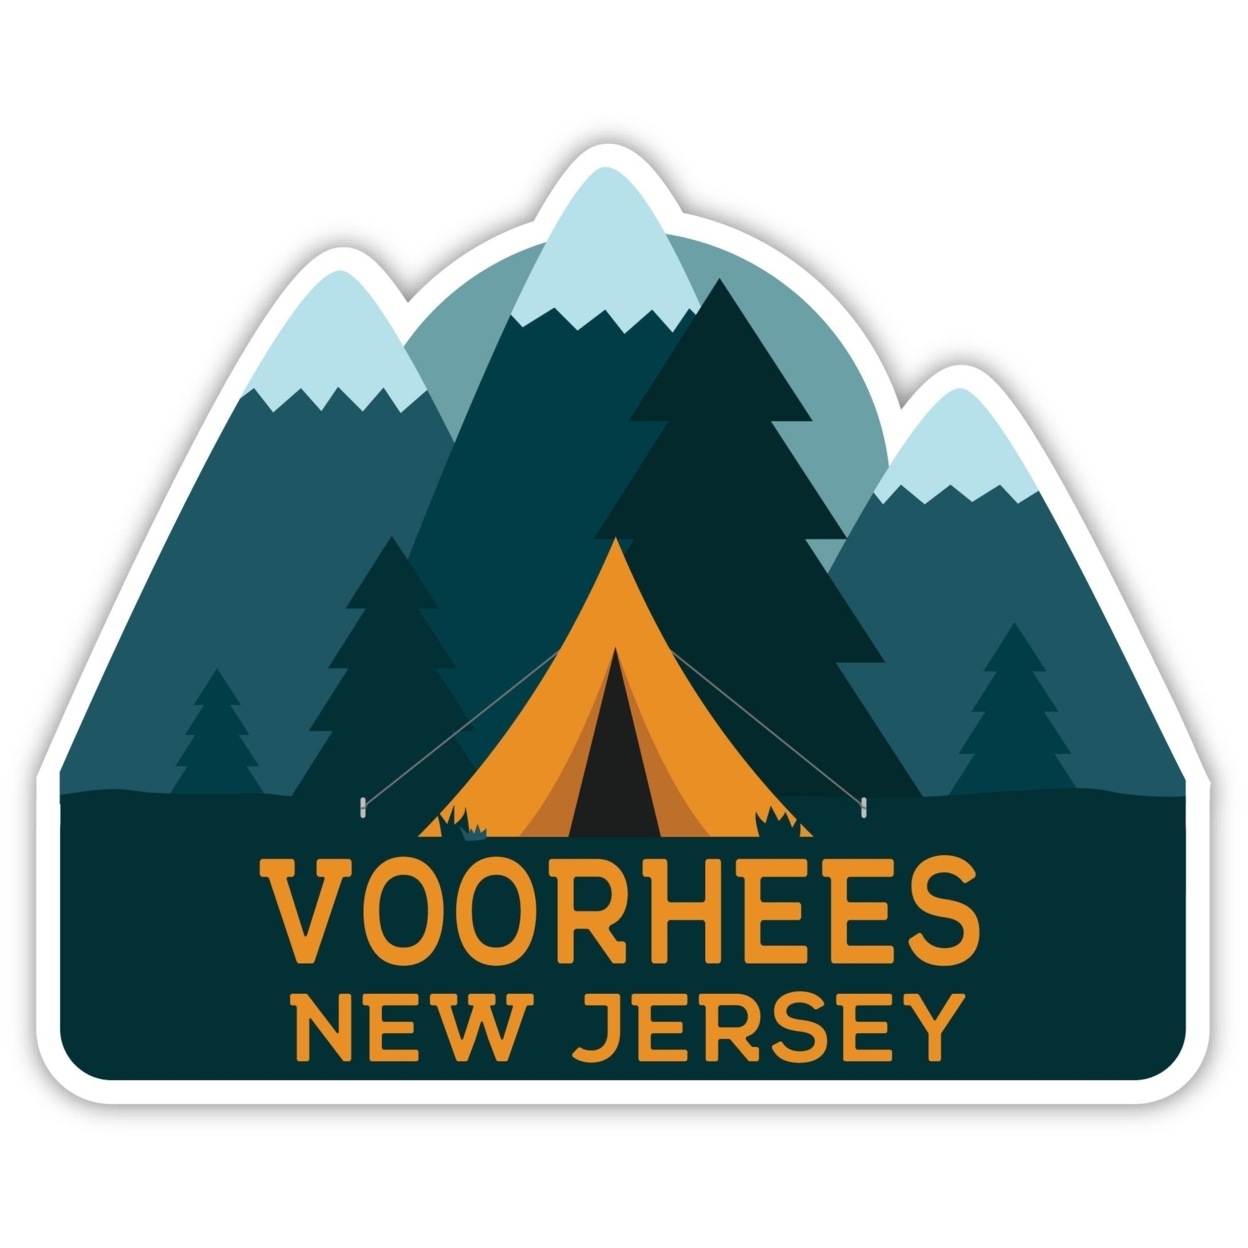 Voorhees New Jersey Souvenir Decorative Stickers (Choose Theme And Size) - Single Unit, 2-Inch, Tent